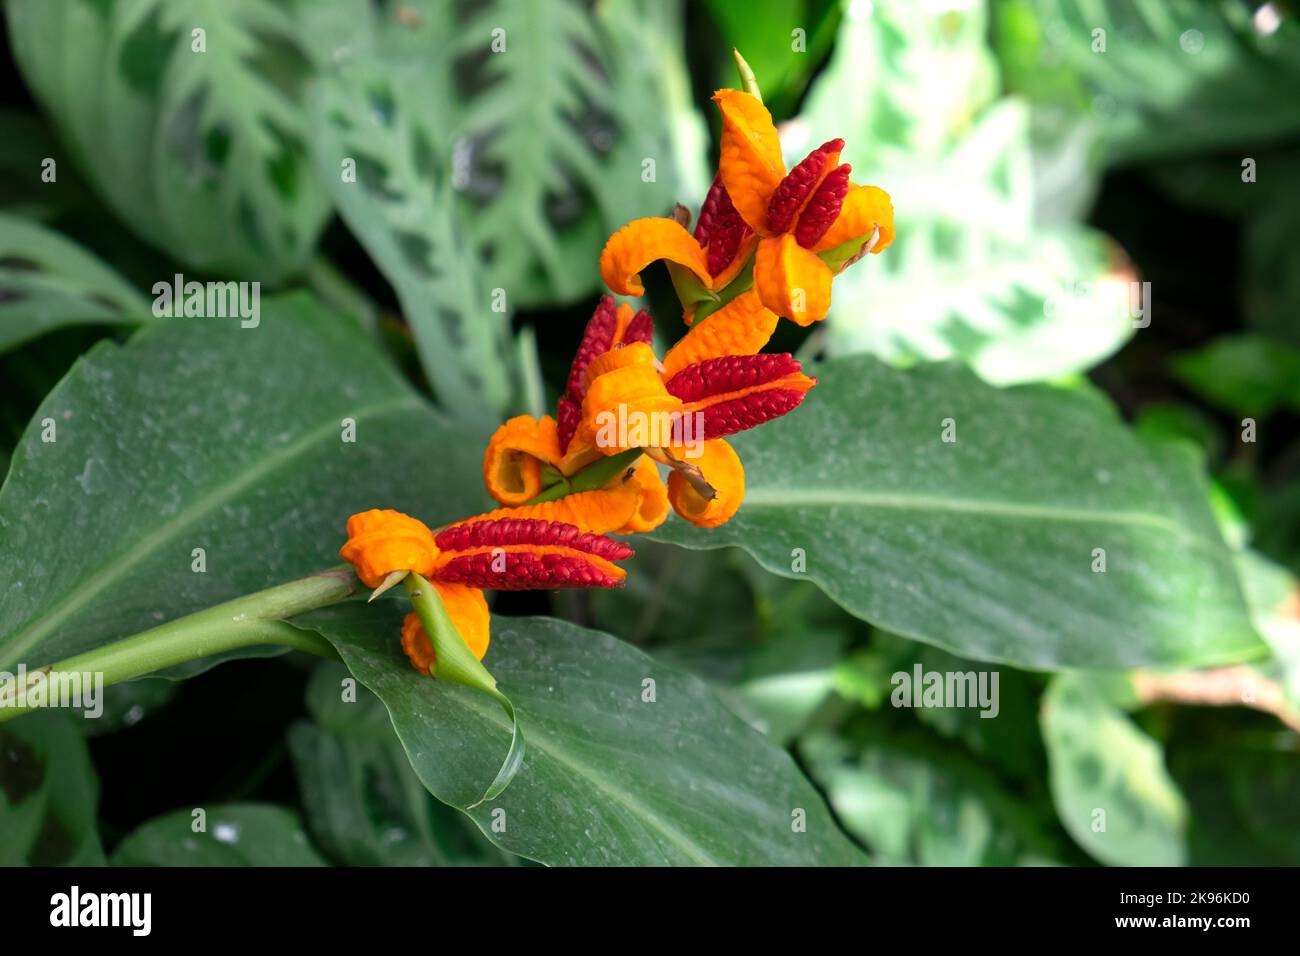 Orange and red flowers in bloom on tropical plant inside tropical house at the National Botanic Garden of Wales Carmarthenshire Wales UK KATHY DEWITT Stock Photo